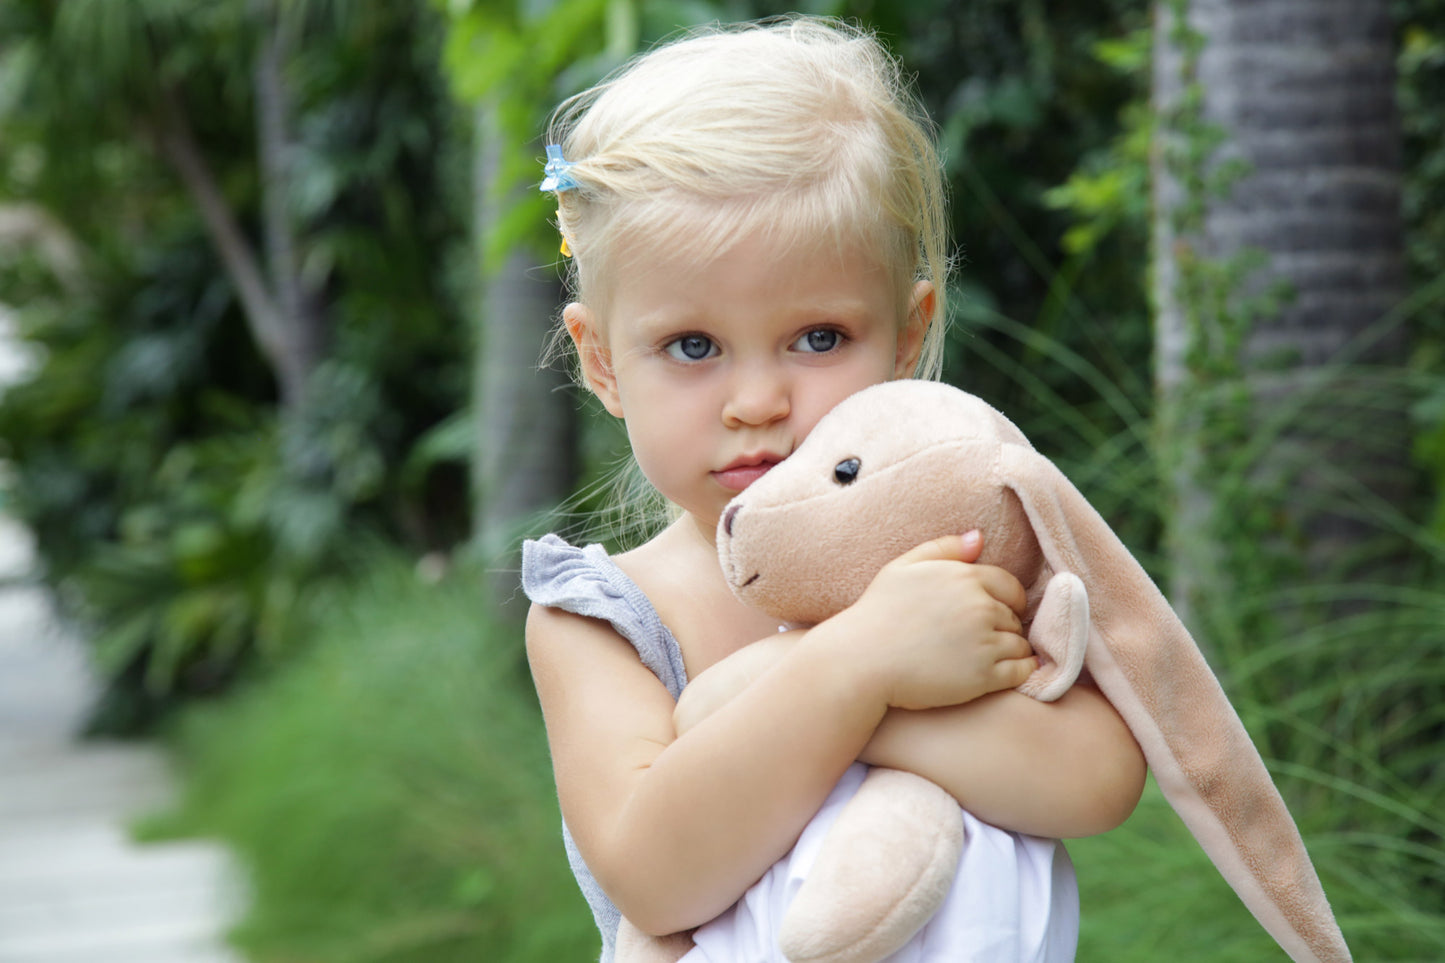 Blankie: Friend or Foe? Why Your Child needs It!